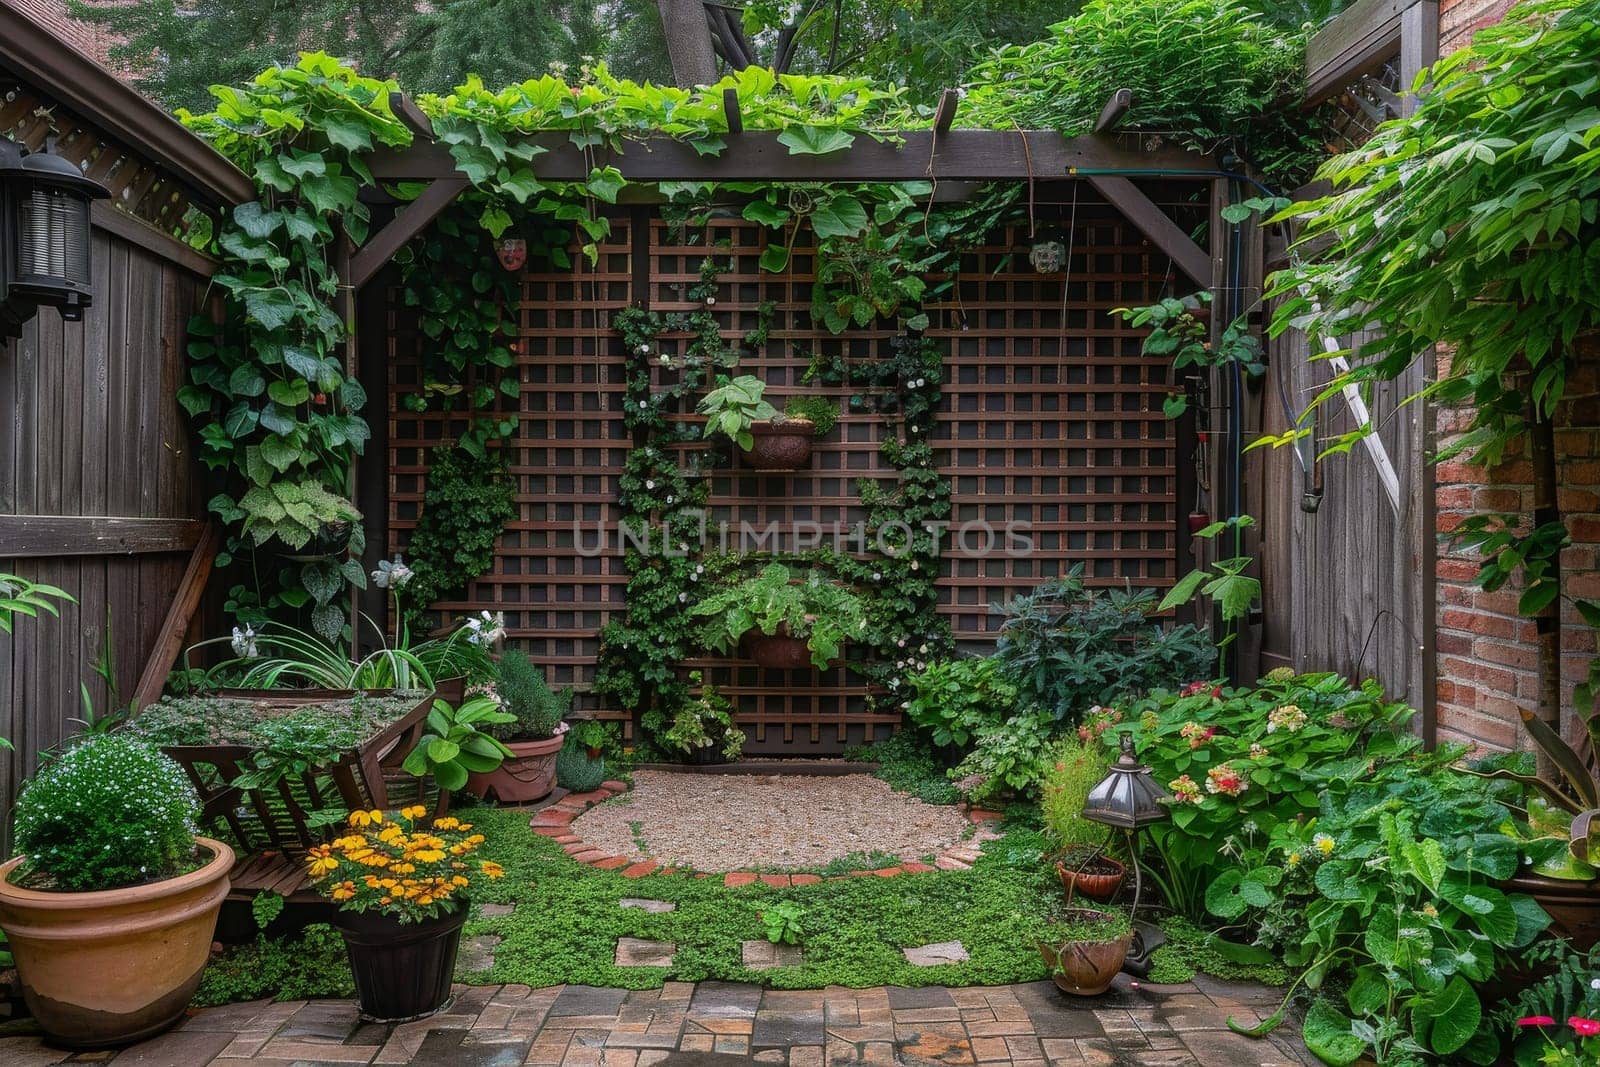 A small garden with a wooden fence and a trellis. The trellis is covered with vines and has a few potted plants